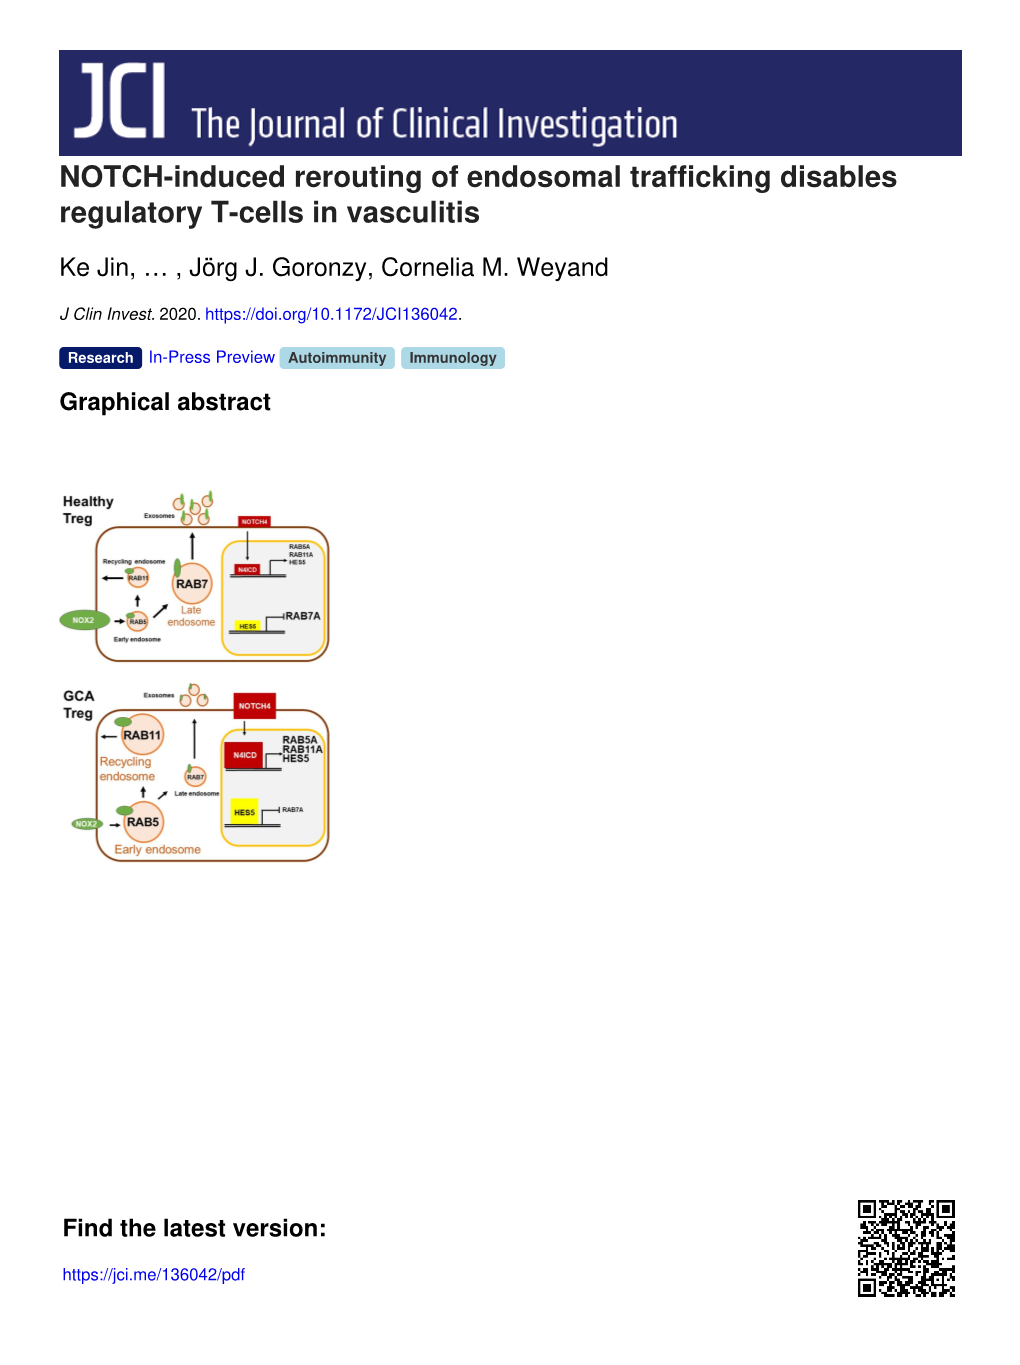 NOTCH-Induced Rerouting of Endosomal Trafficking Disables Regulatory T-Cells in Vasculitis